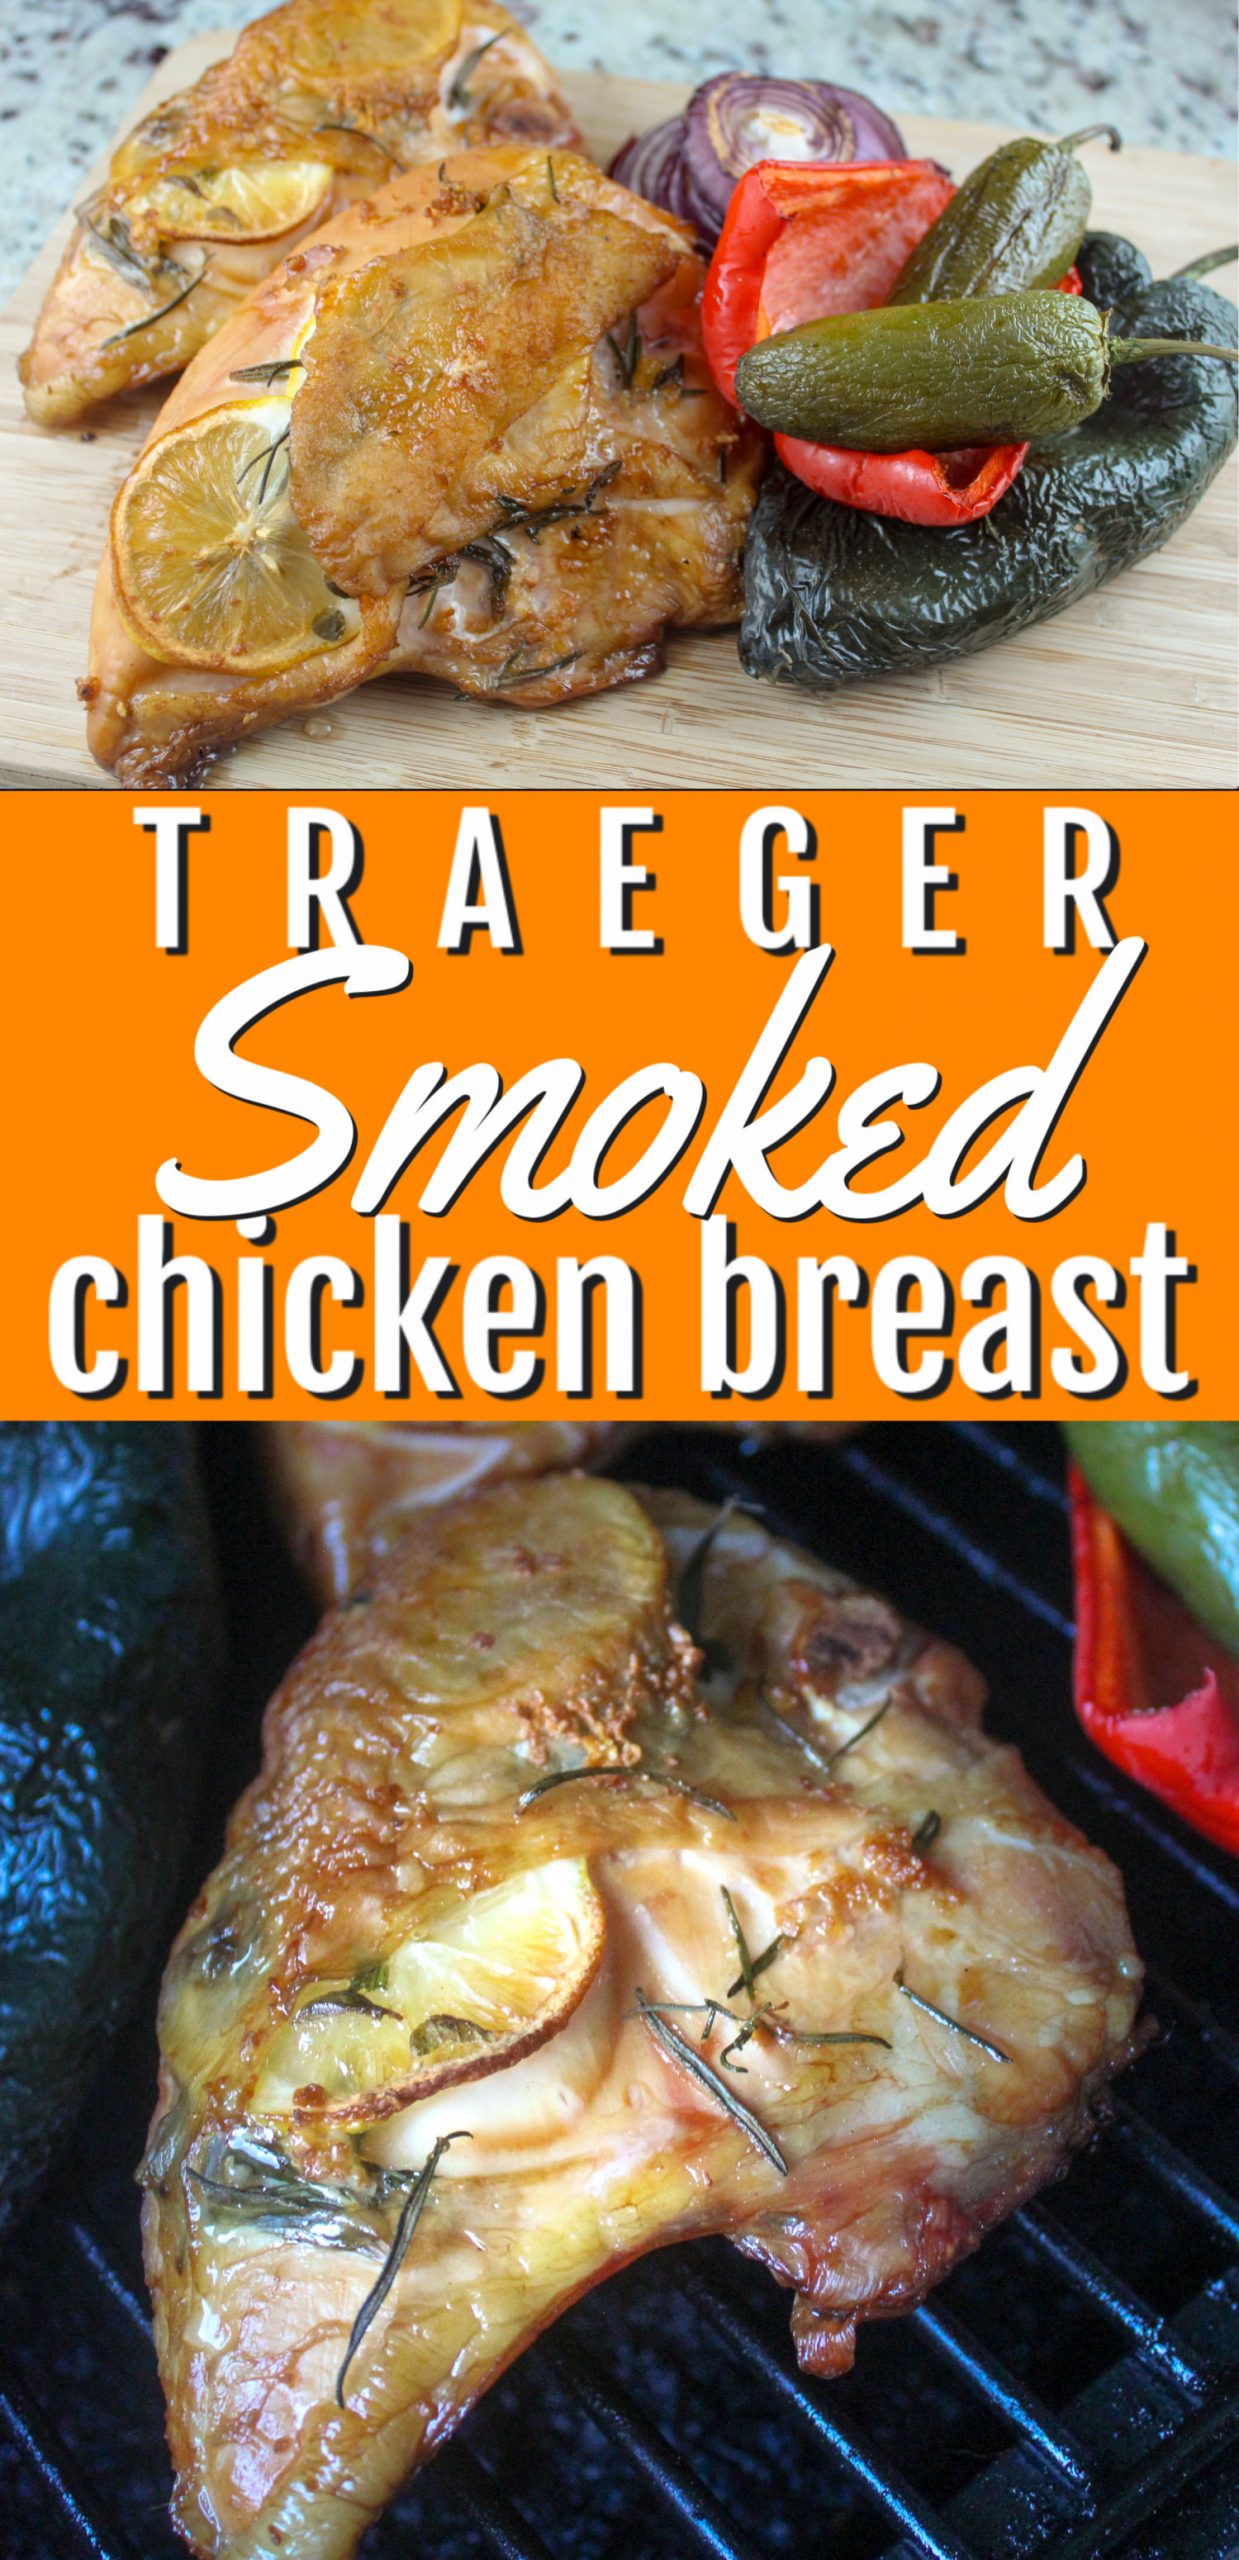 Chicken breast can be tricky when you grill or smoke it - it can dry out easily. BUT I've got you covered!!!! This smoked chicken breast was juicy and delicious with that smokey flavor that only comes from those yummy Traeger wood pellets!  via @foodhussy